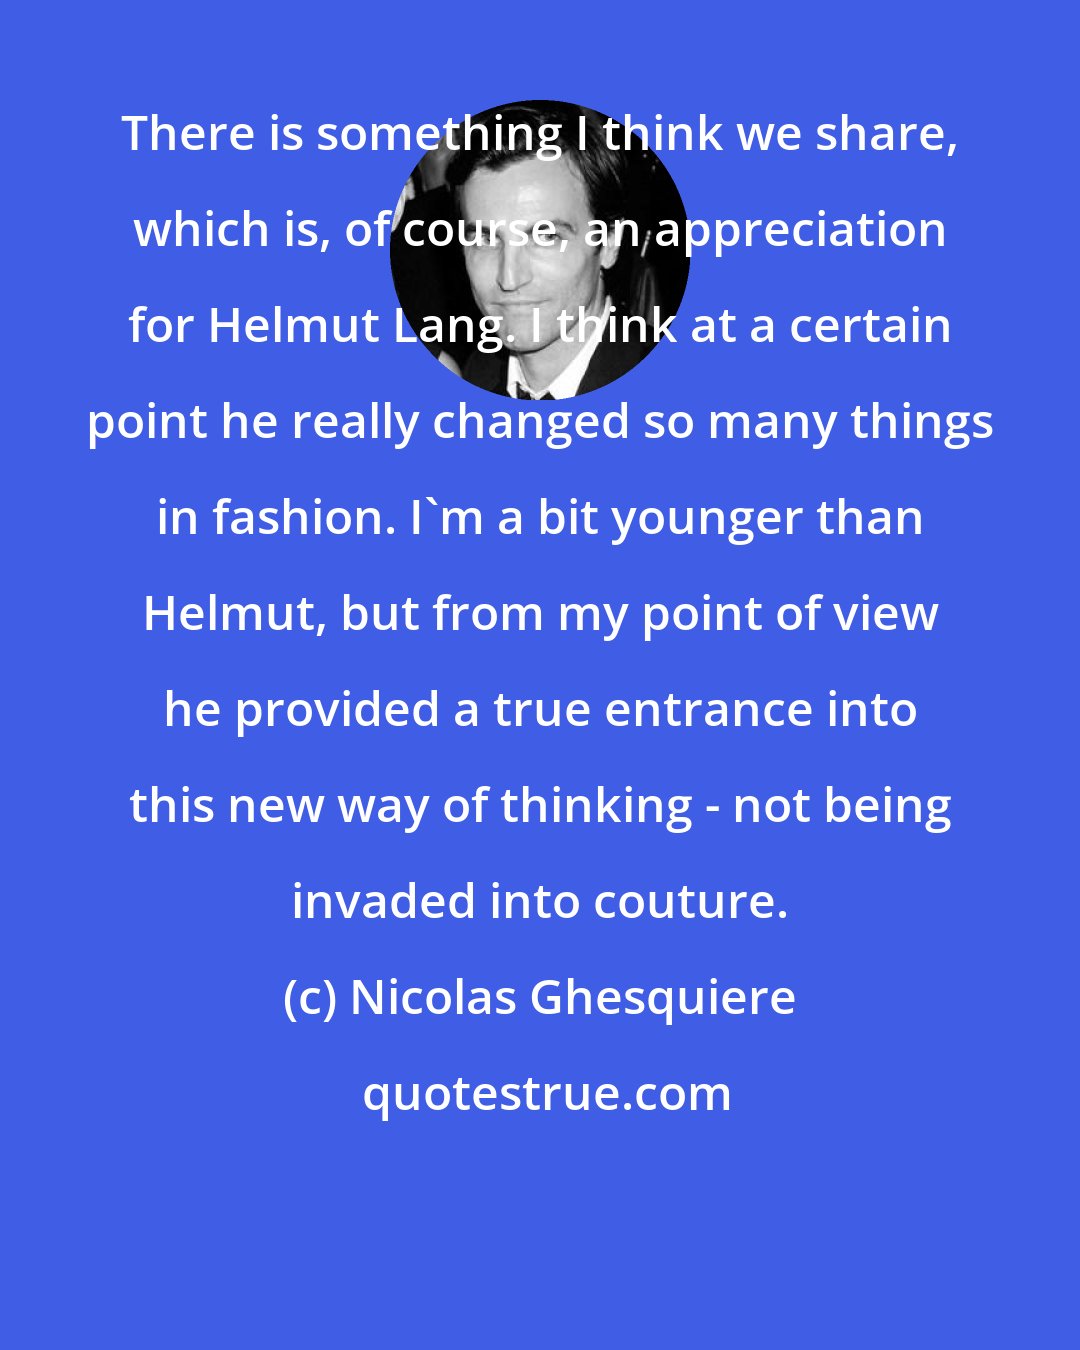 Nicolas Ghesquiere: There is something I think we share, which is, of course, an appreciation for Helmut Lang. I think at a certain point he really changed so many things in fashion. I'm a bit younger than Helmut, but from my point of view he provided a true entrance into this new way of thinking - not being invaded into couture.